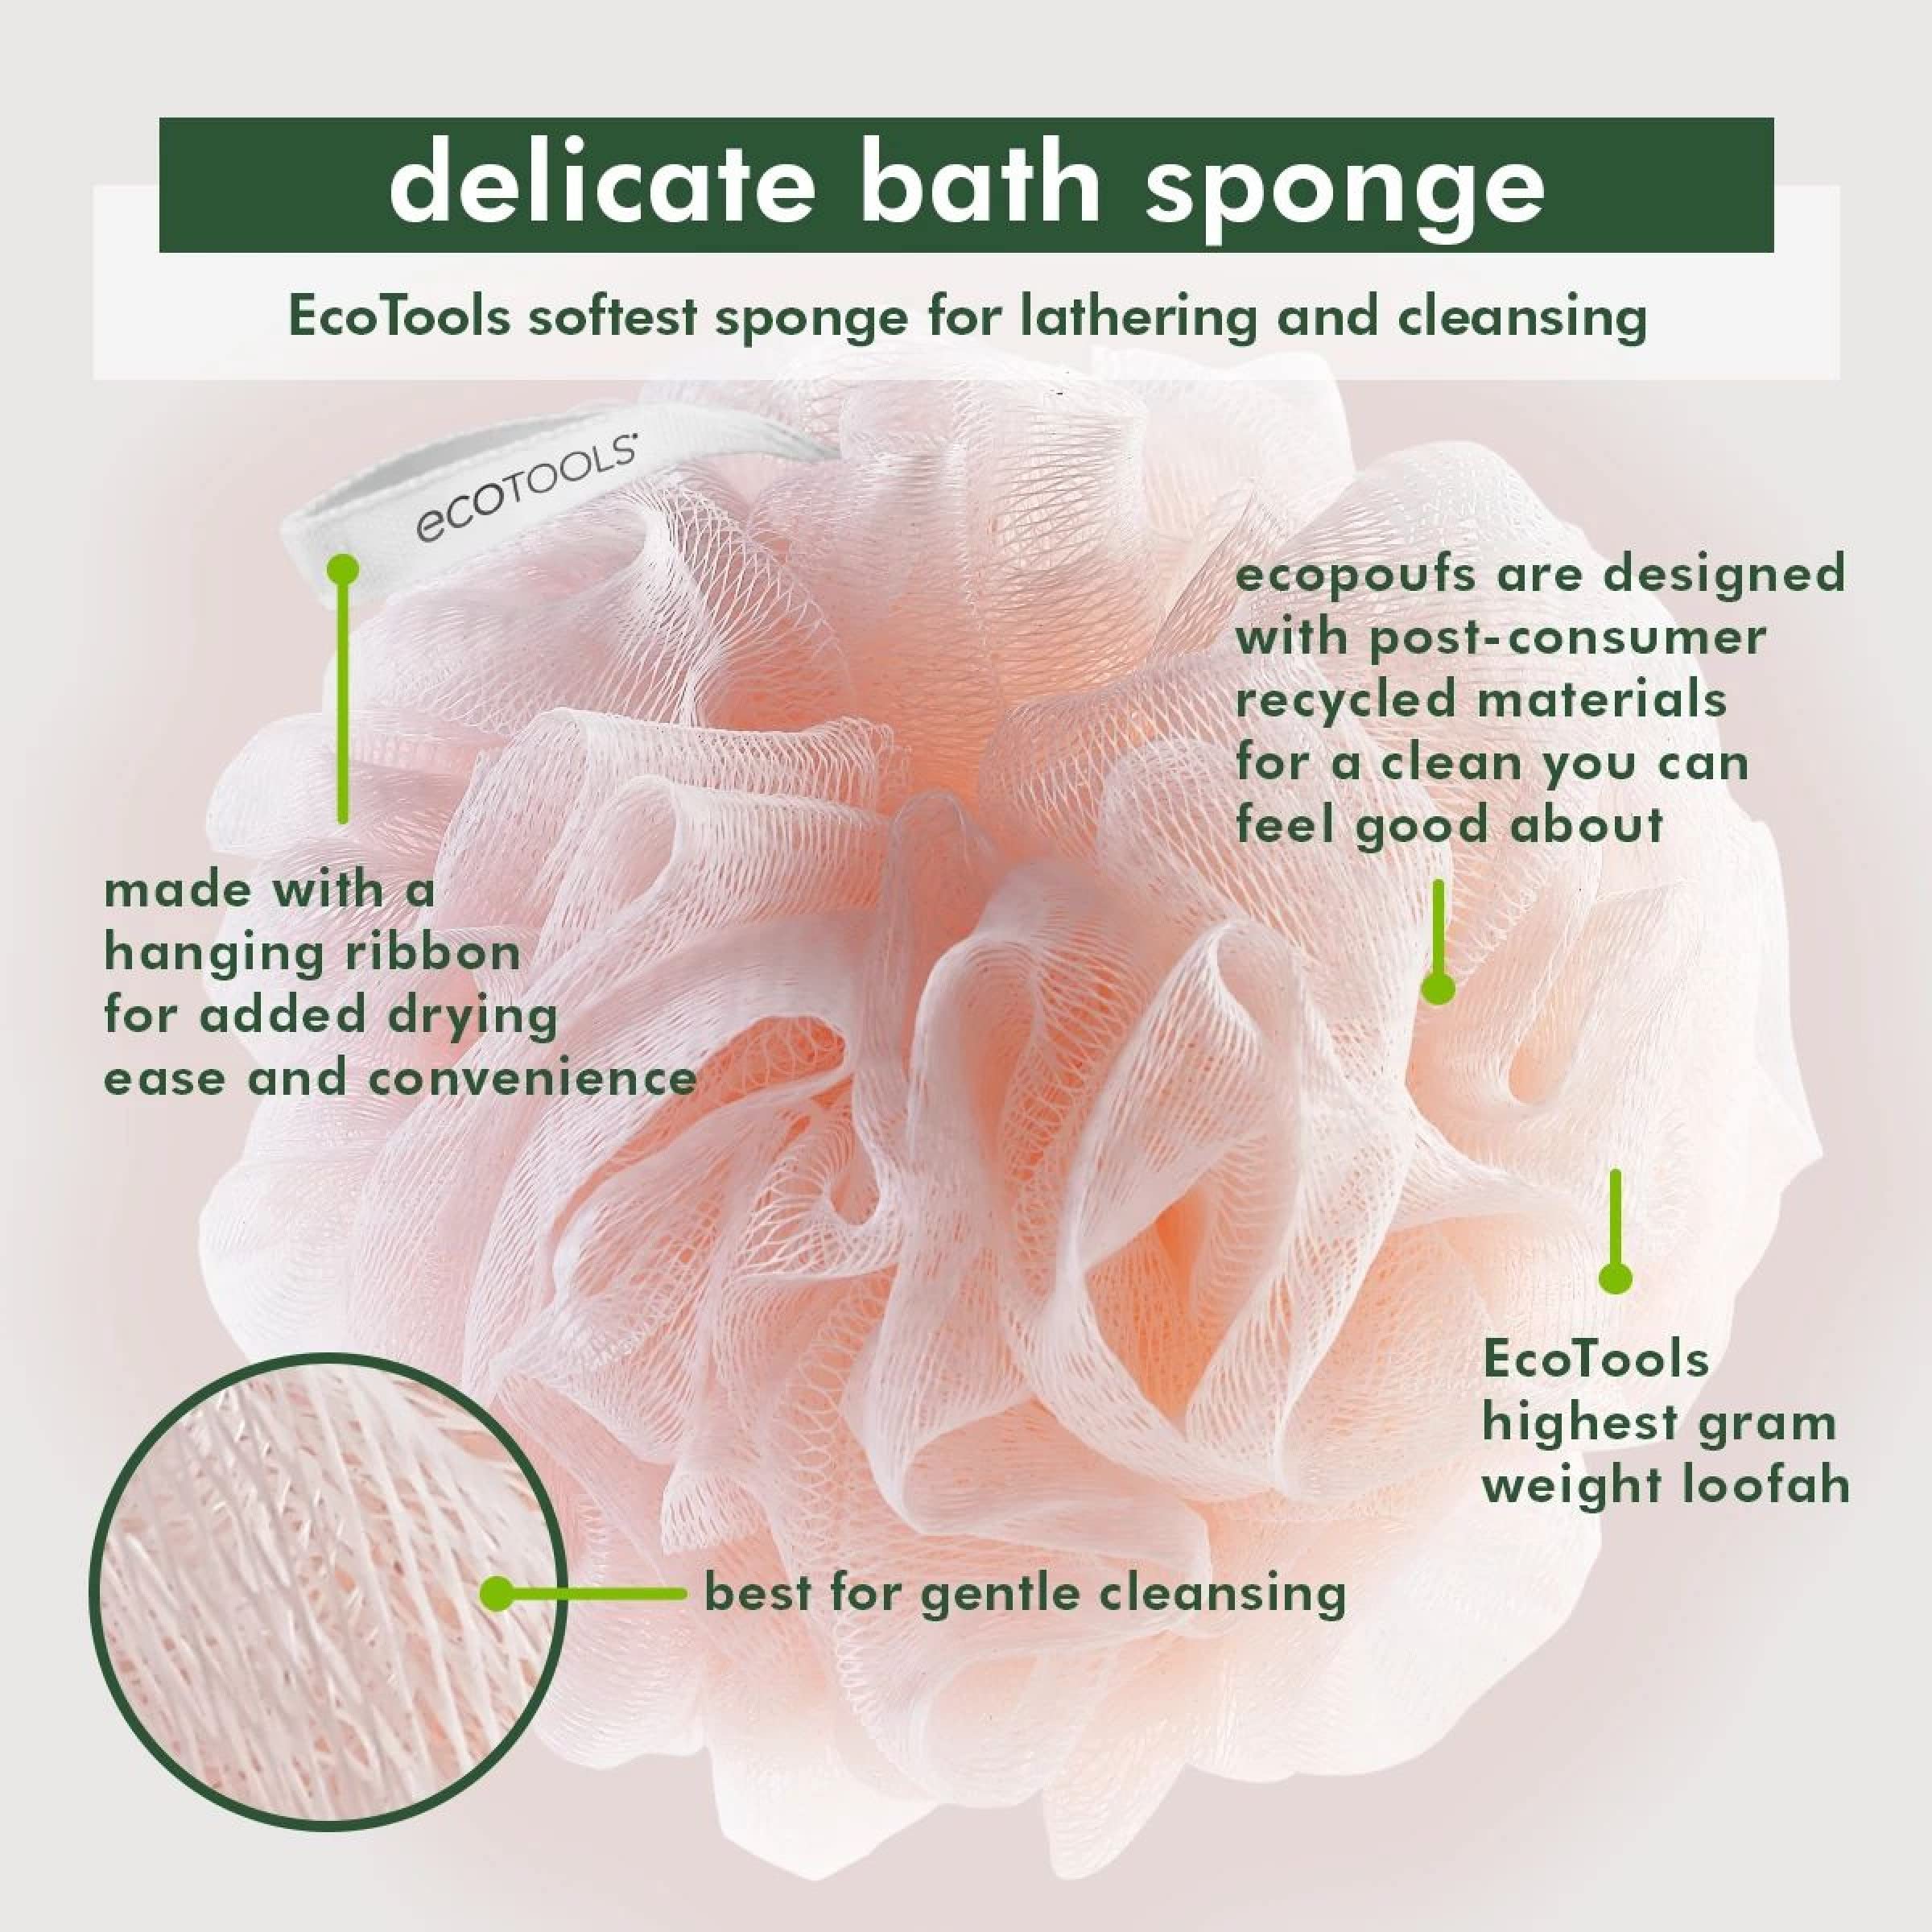 EcoTools Delicate EcoPouf Bath Sponge,Made With Recycled Materials,Exfoliating Bath Pouf,Loofah for Shower & Bath,In Assorted Colors,Green,White,Pink,and Gray,Perfect for Men & Women,6 Count